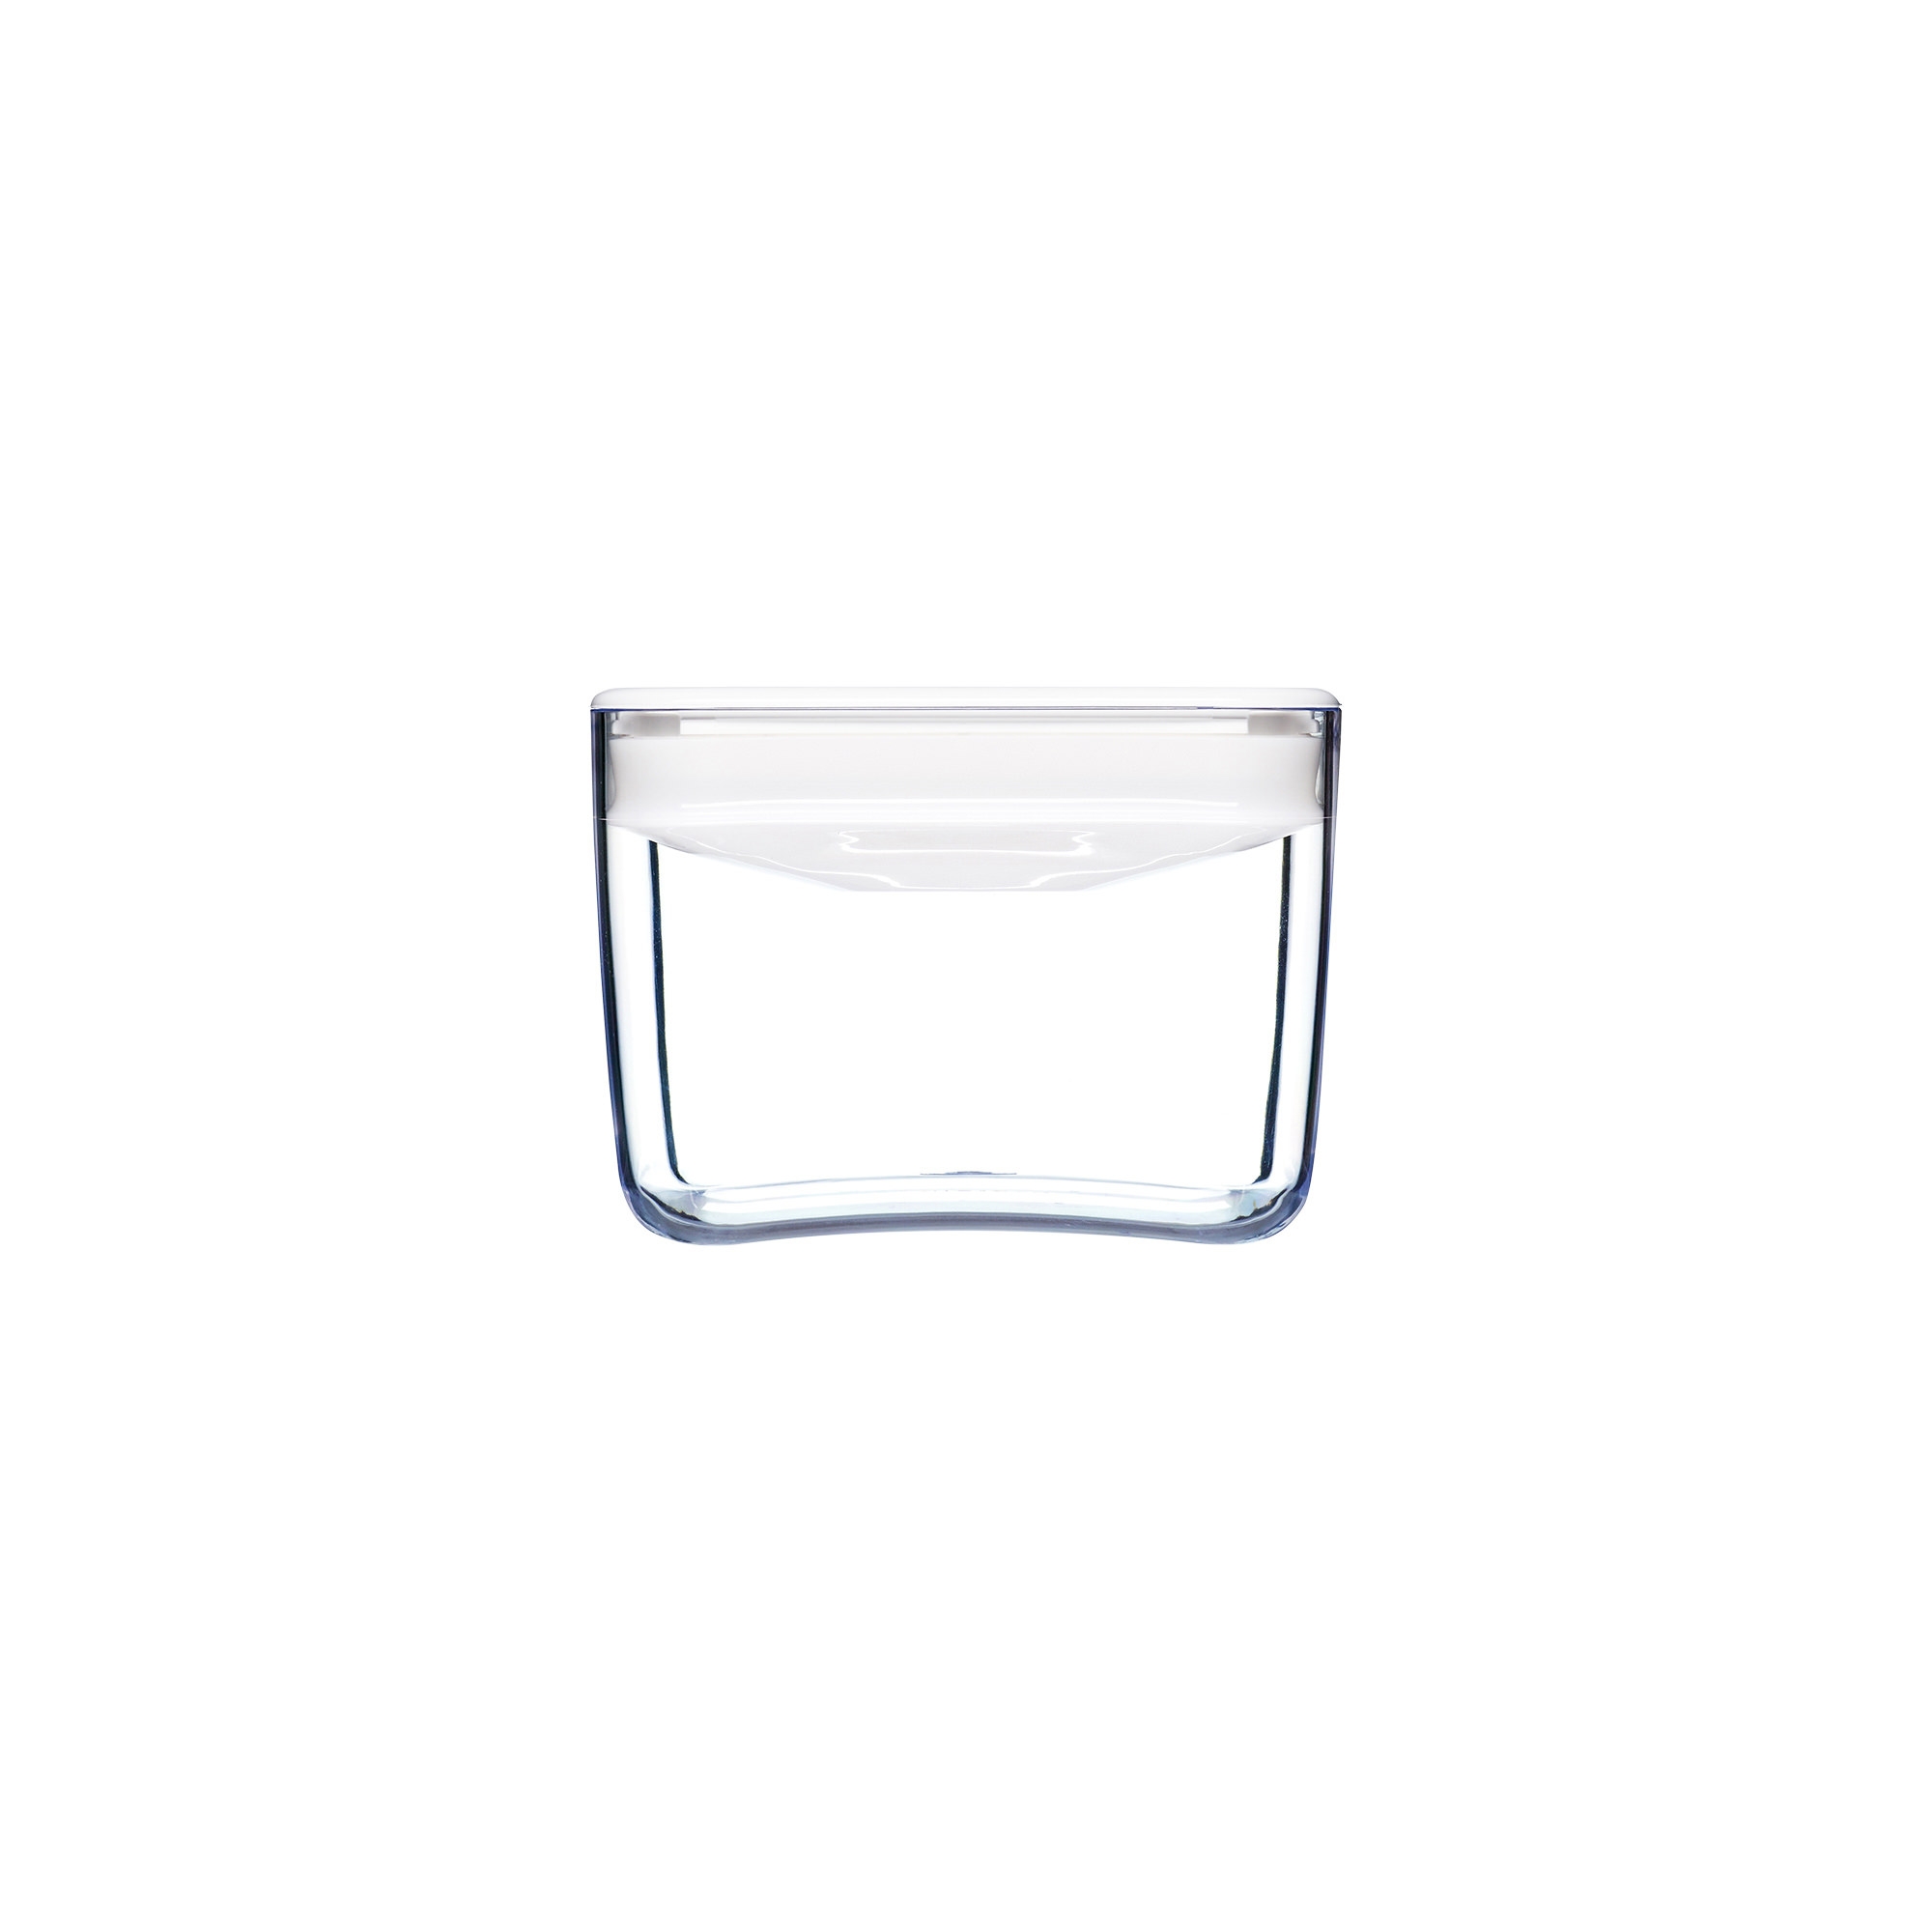 ClickClack Pantry Cube Container with White Lid 900ml Image 1